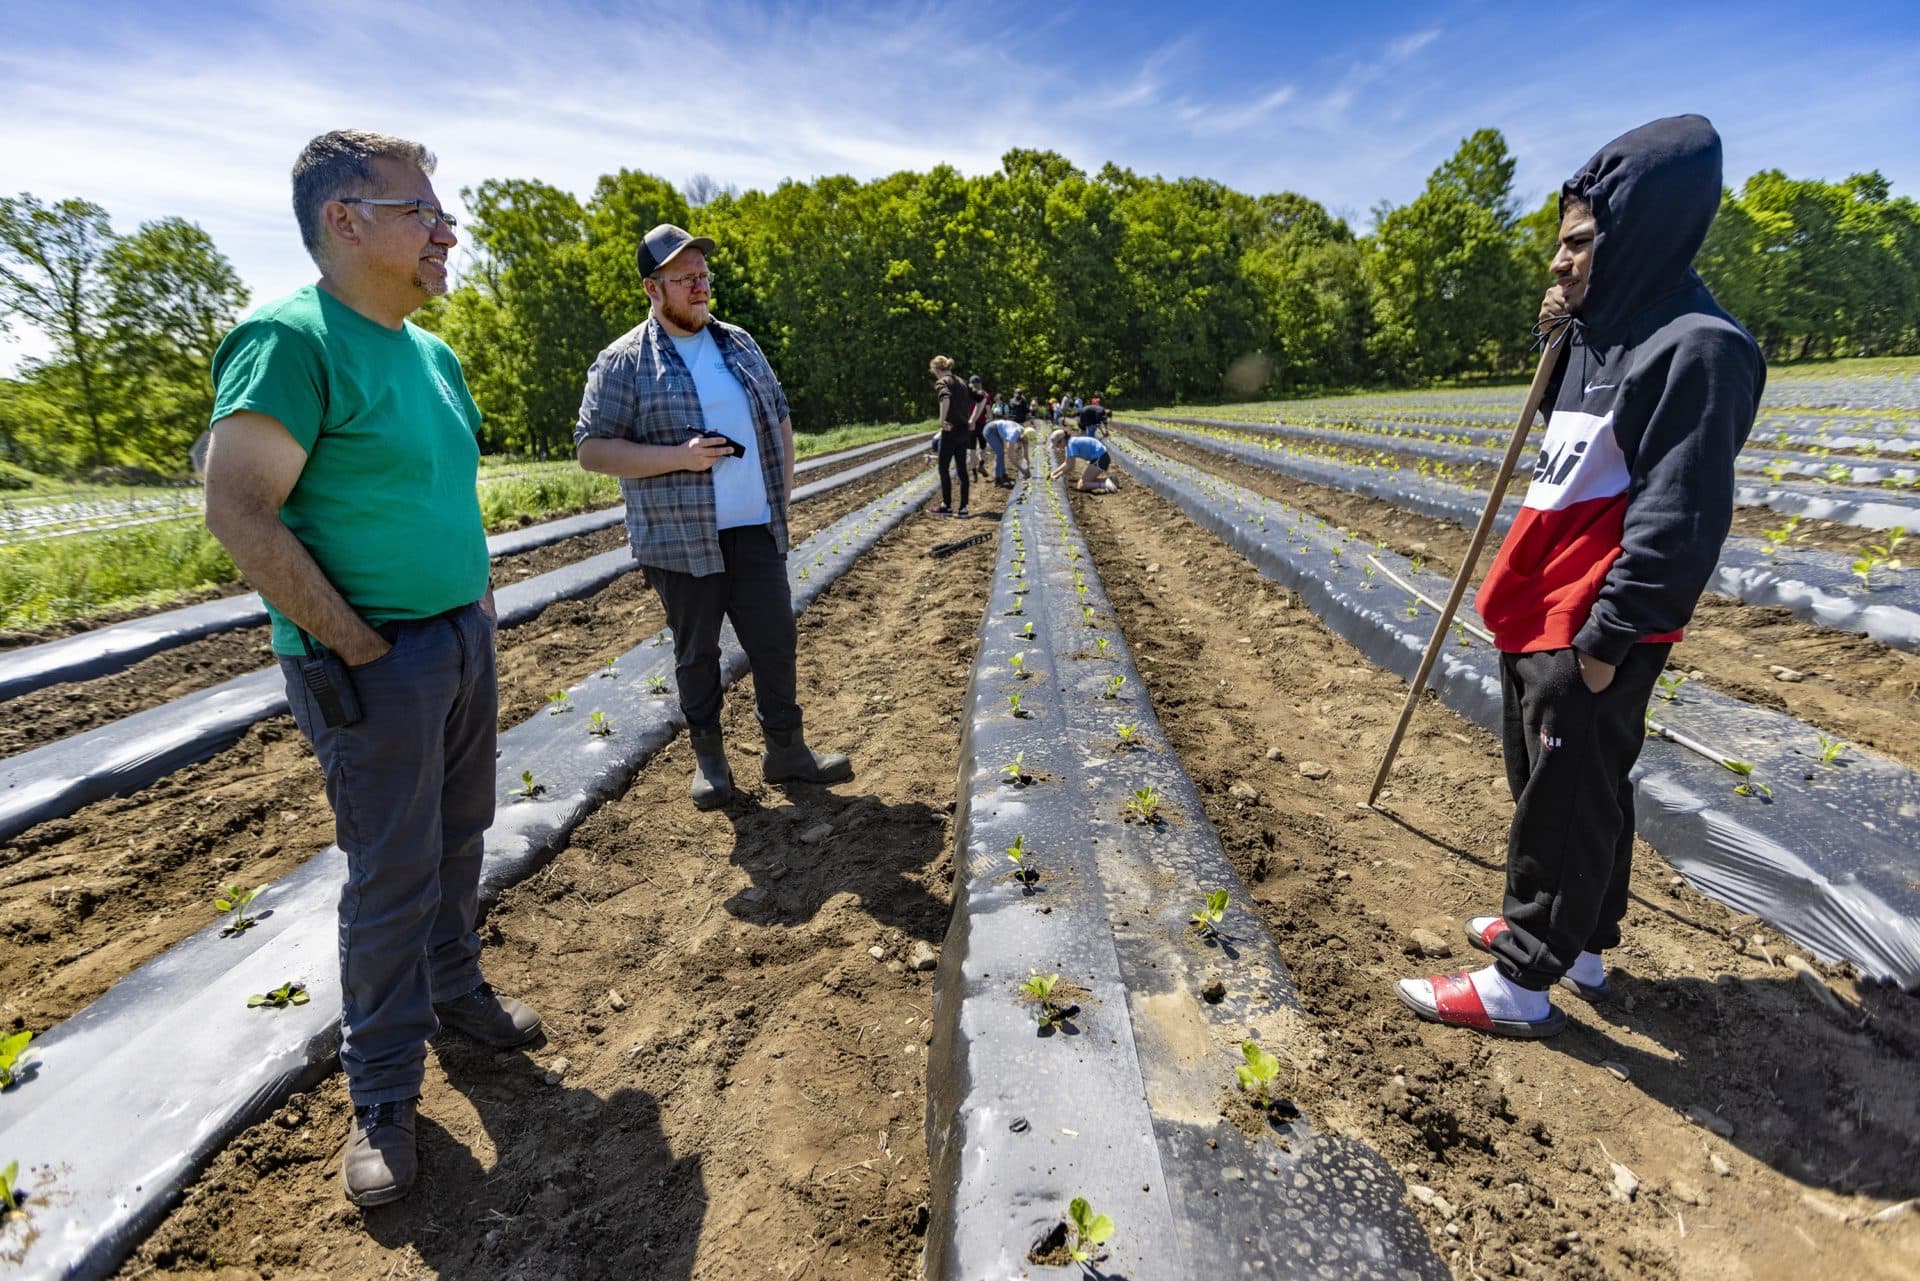 Wayne McAuliffe, manager of volunteer programs, and Dave Johnson, farm manager, speak with South High Community School student Alex Lanzo during a break from planting. (Jesse Costa/WBUR)